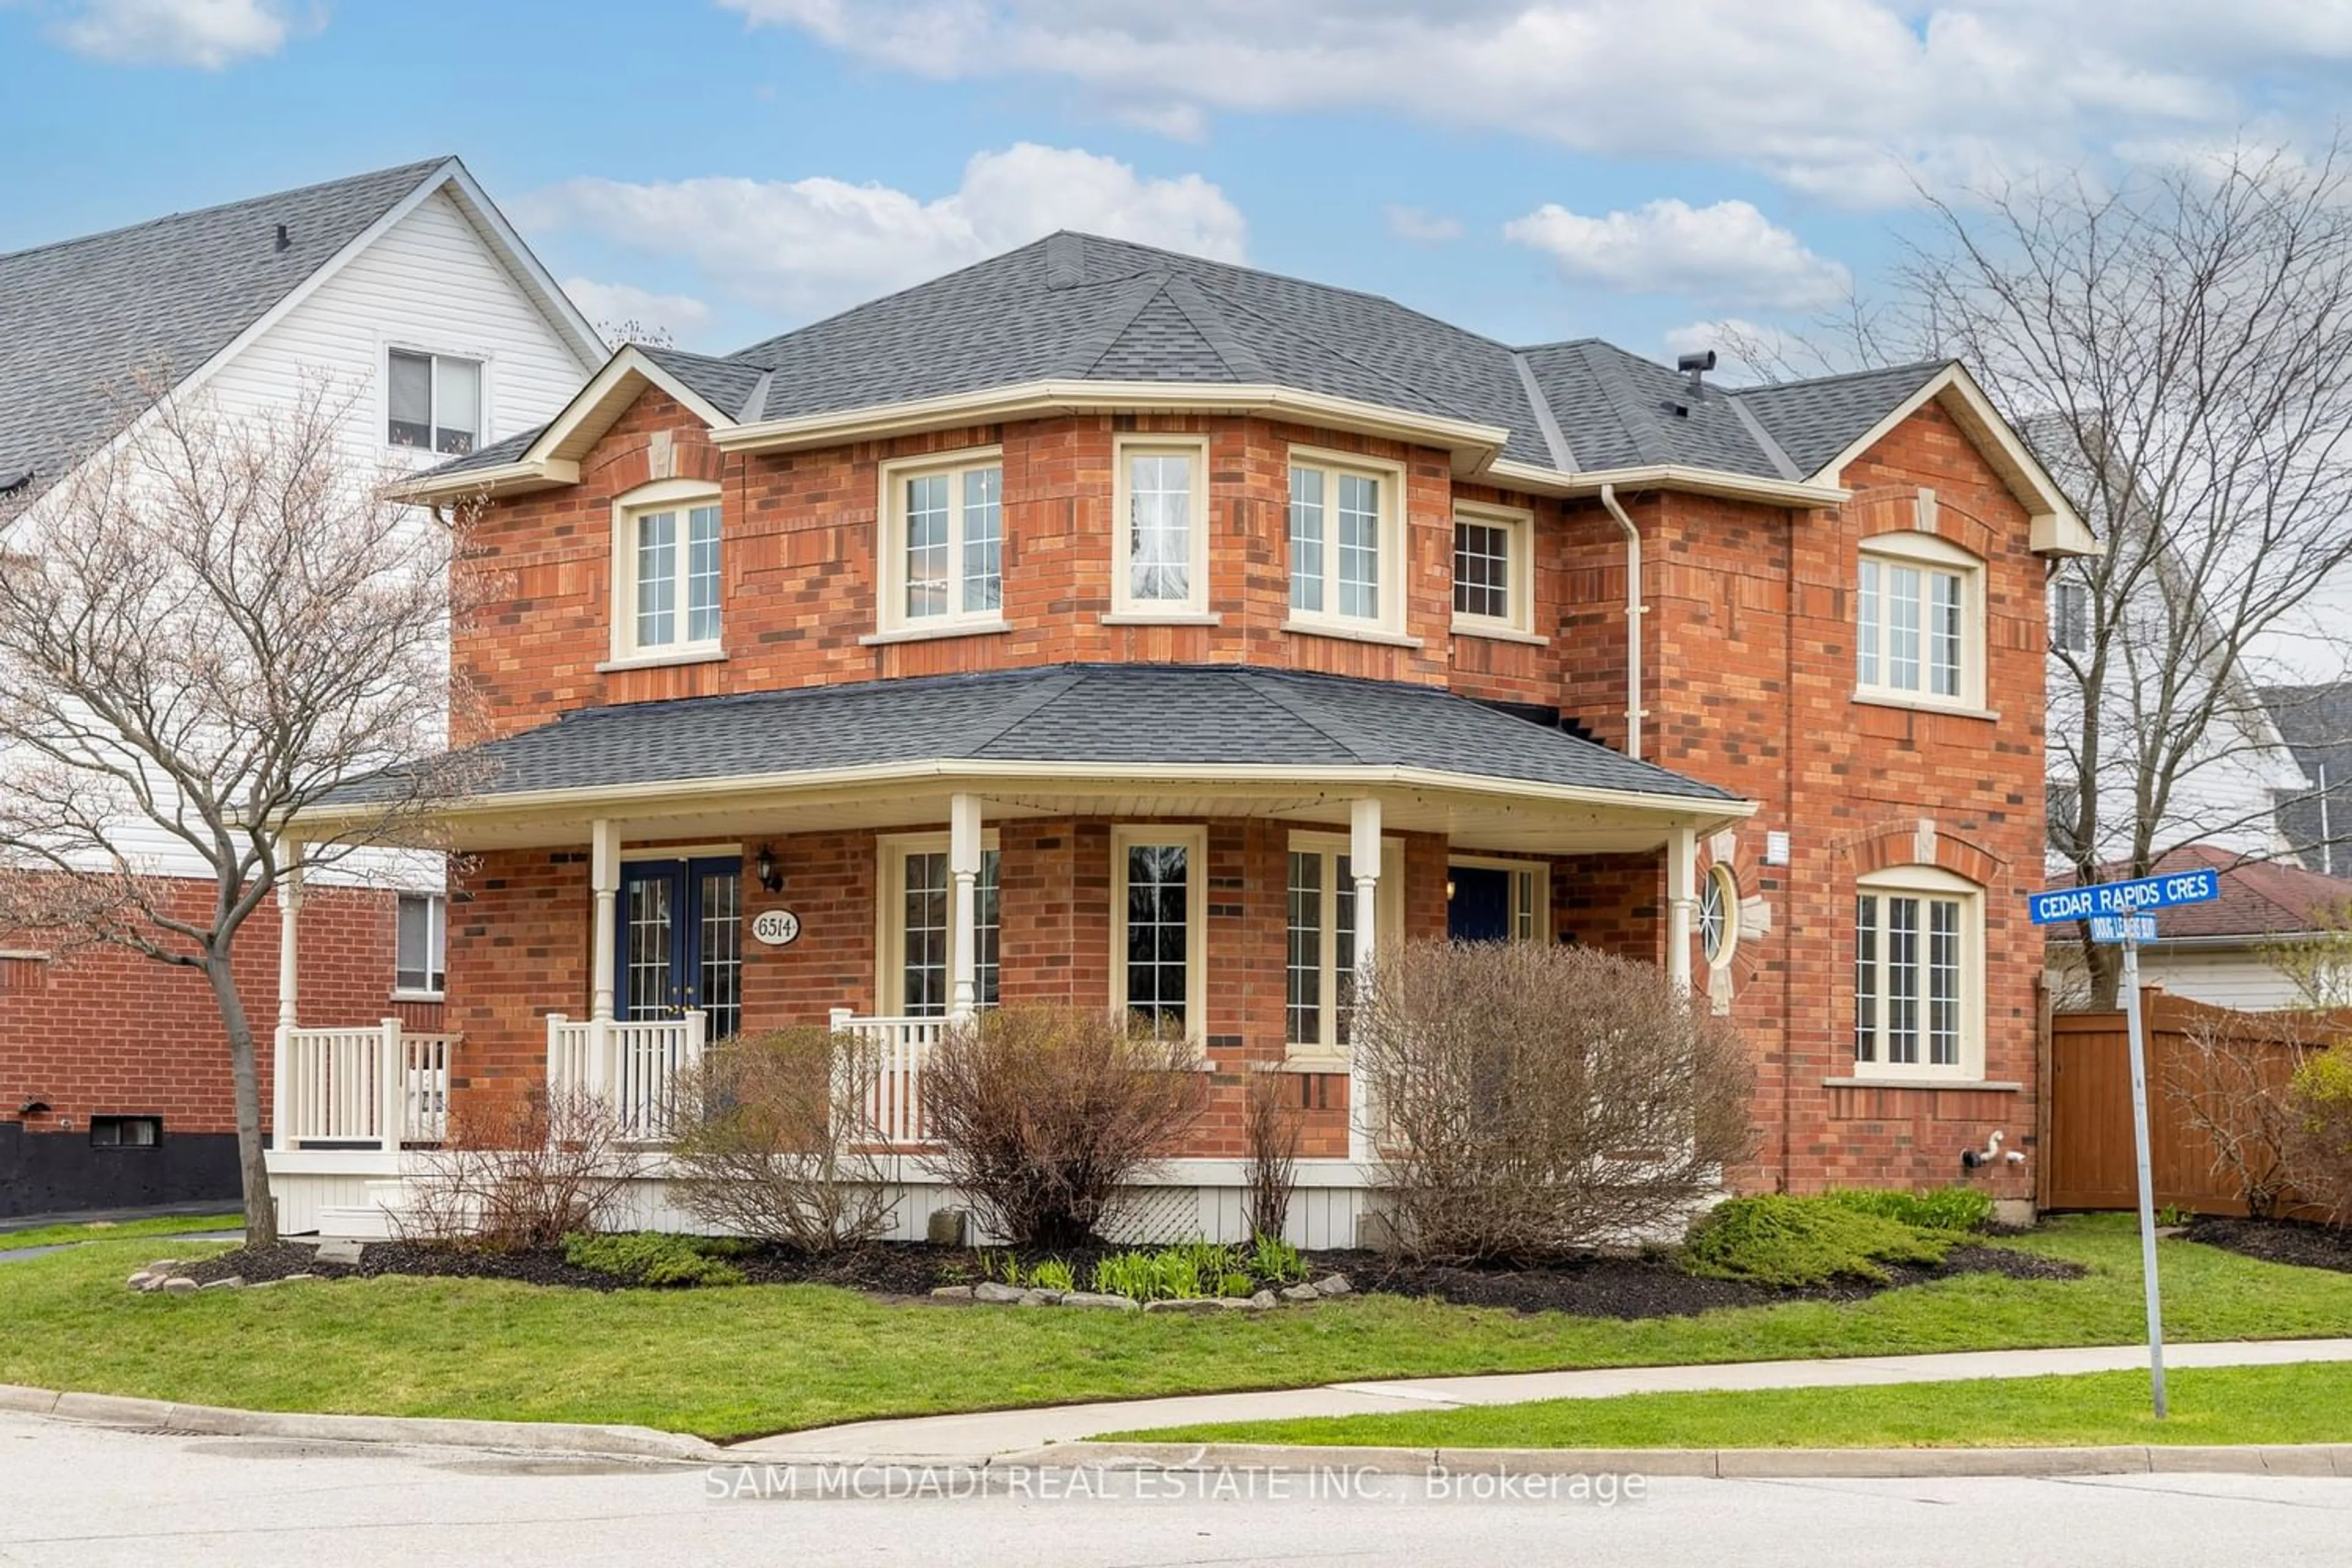 Home with brick exterior material for 6514 Cedar Rapids Cres, Mississauga Ontario L5N 7P5